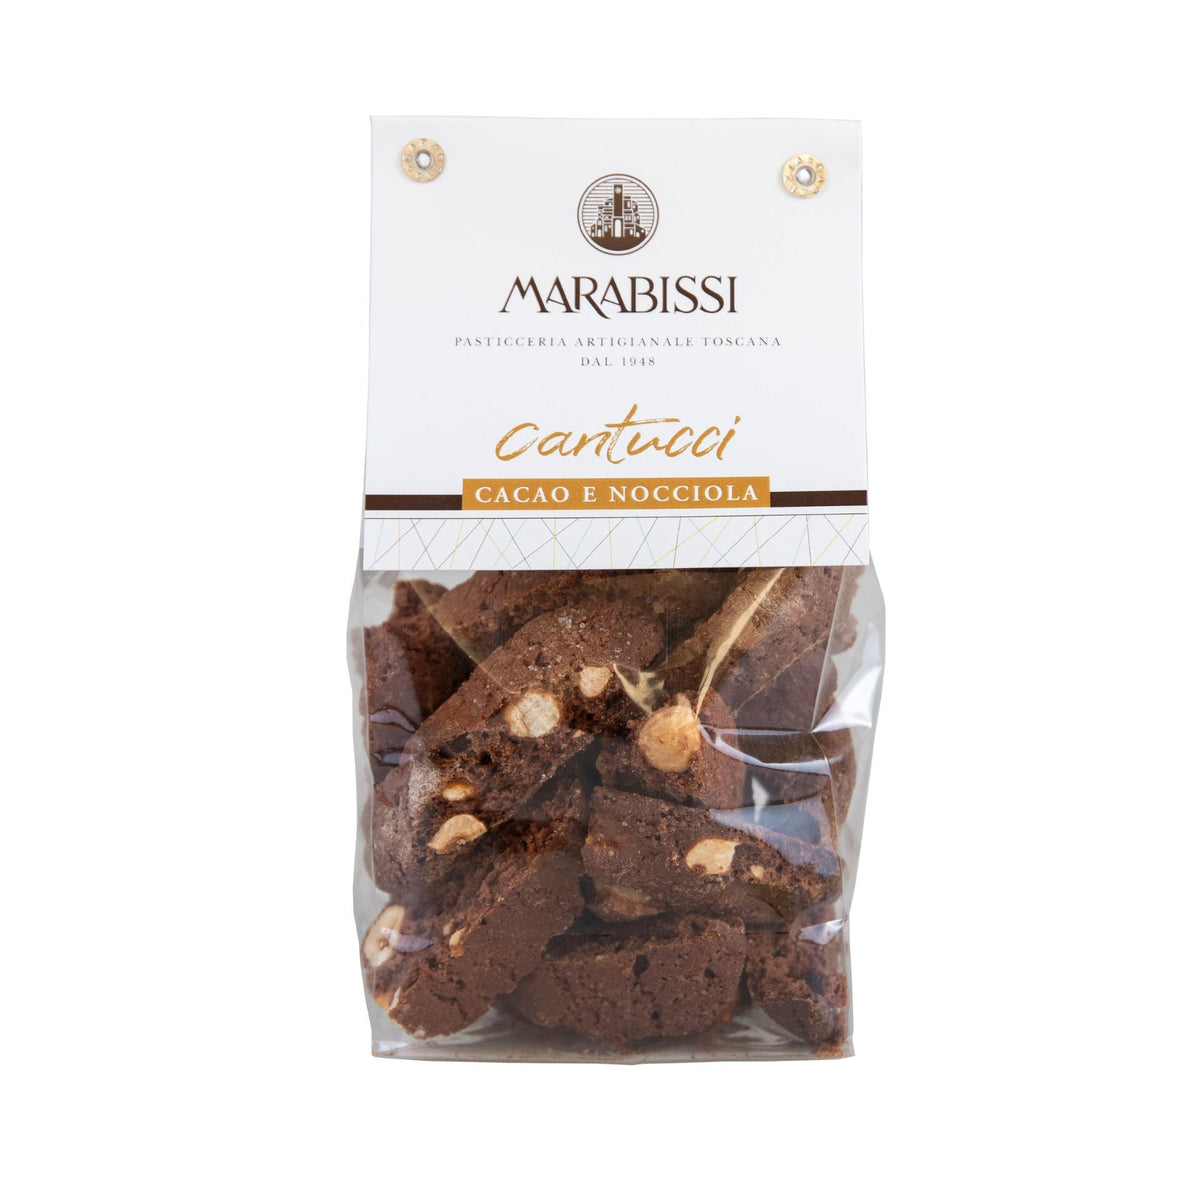 Marabissi Chocolate &amp; Hazelnut Cantucci (Bag) 200g  | Imported and distributed in the UK by Just Gourmet Foods